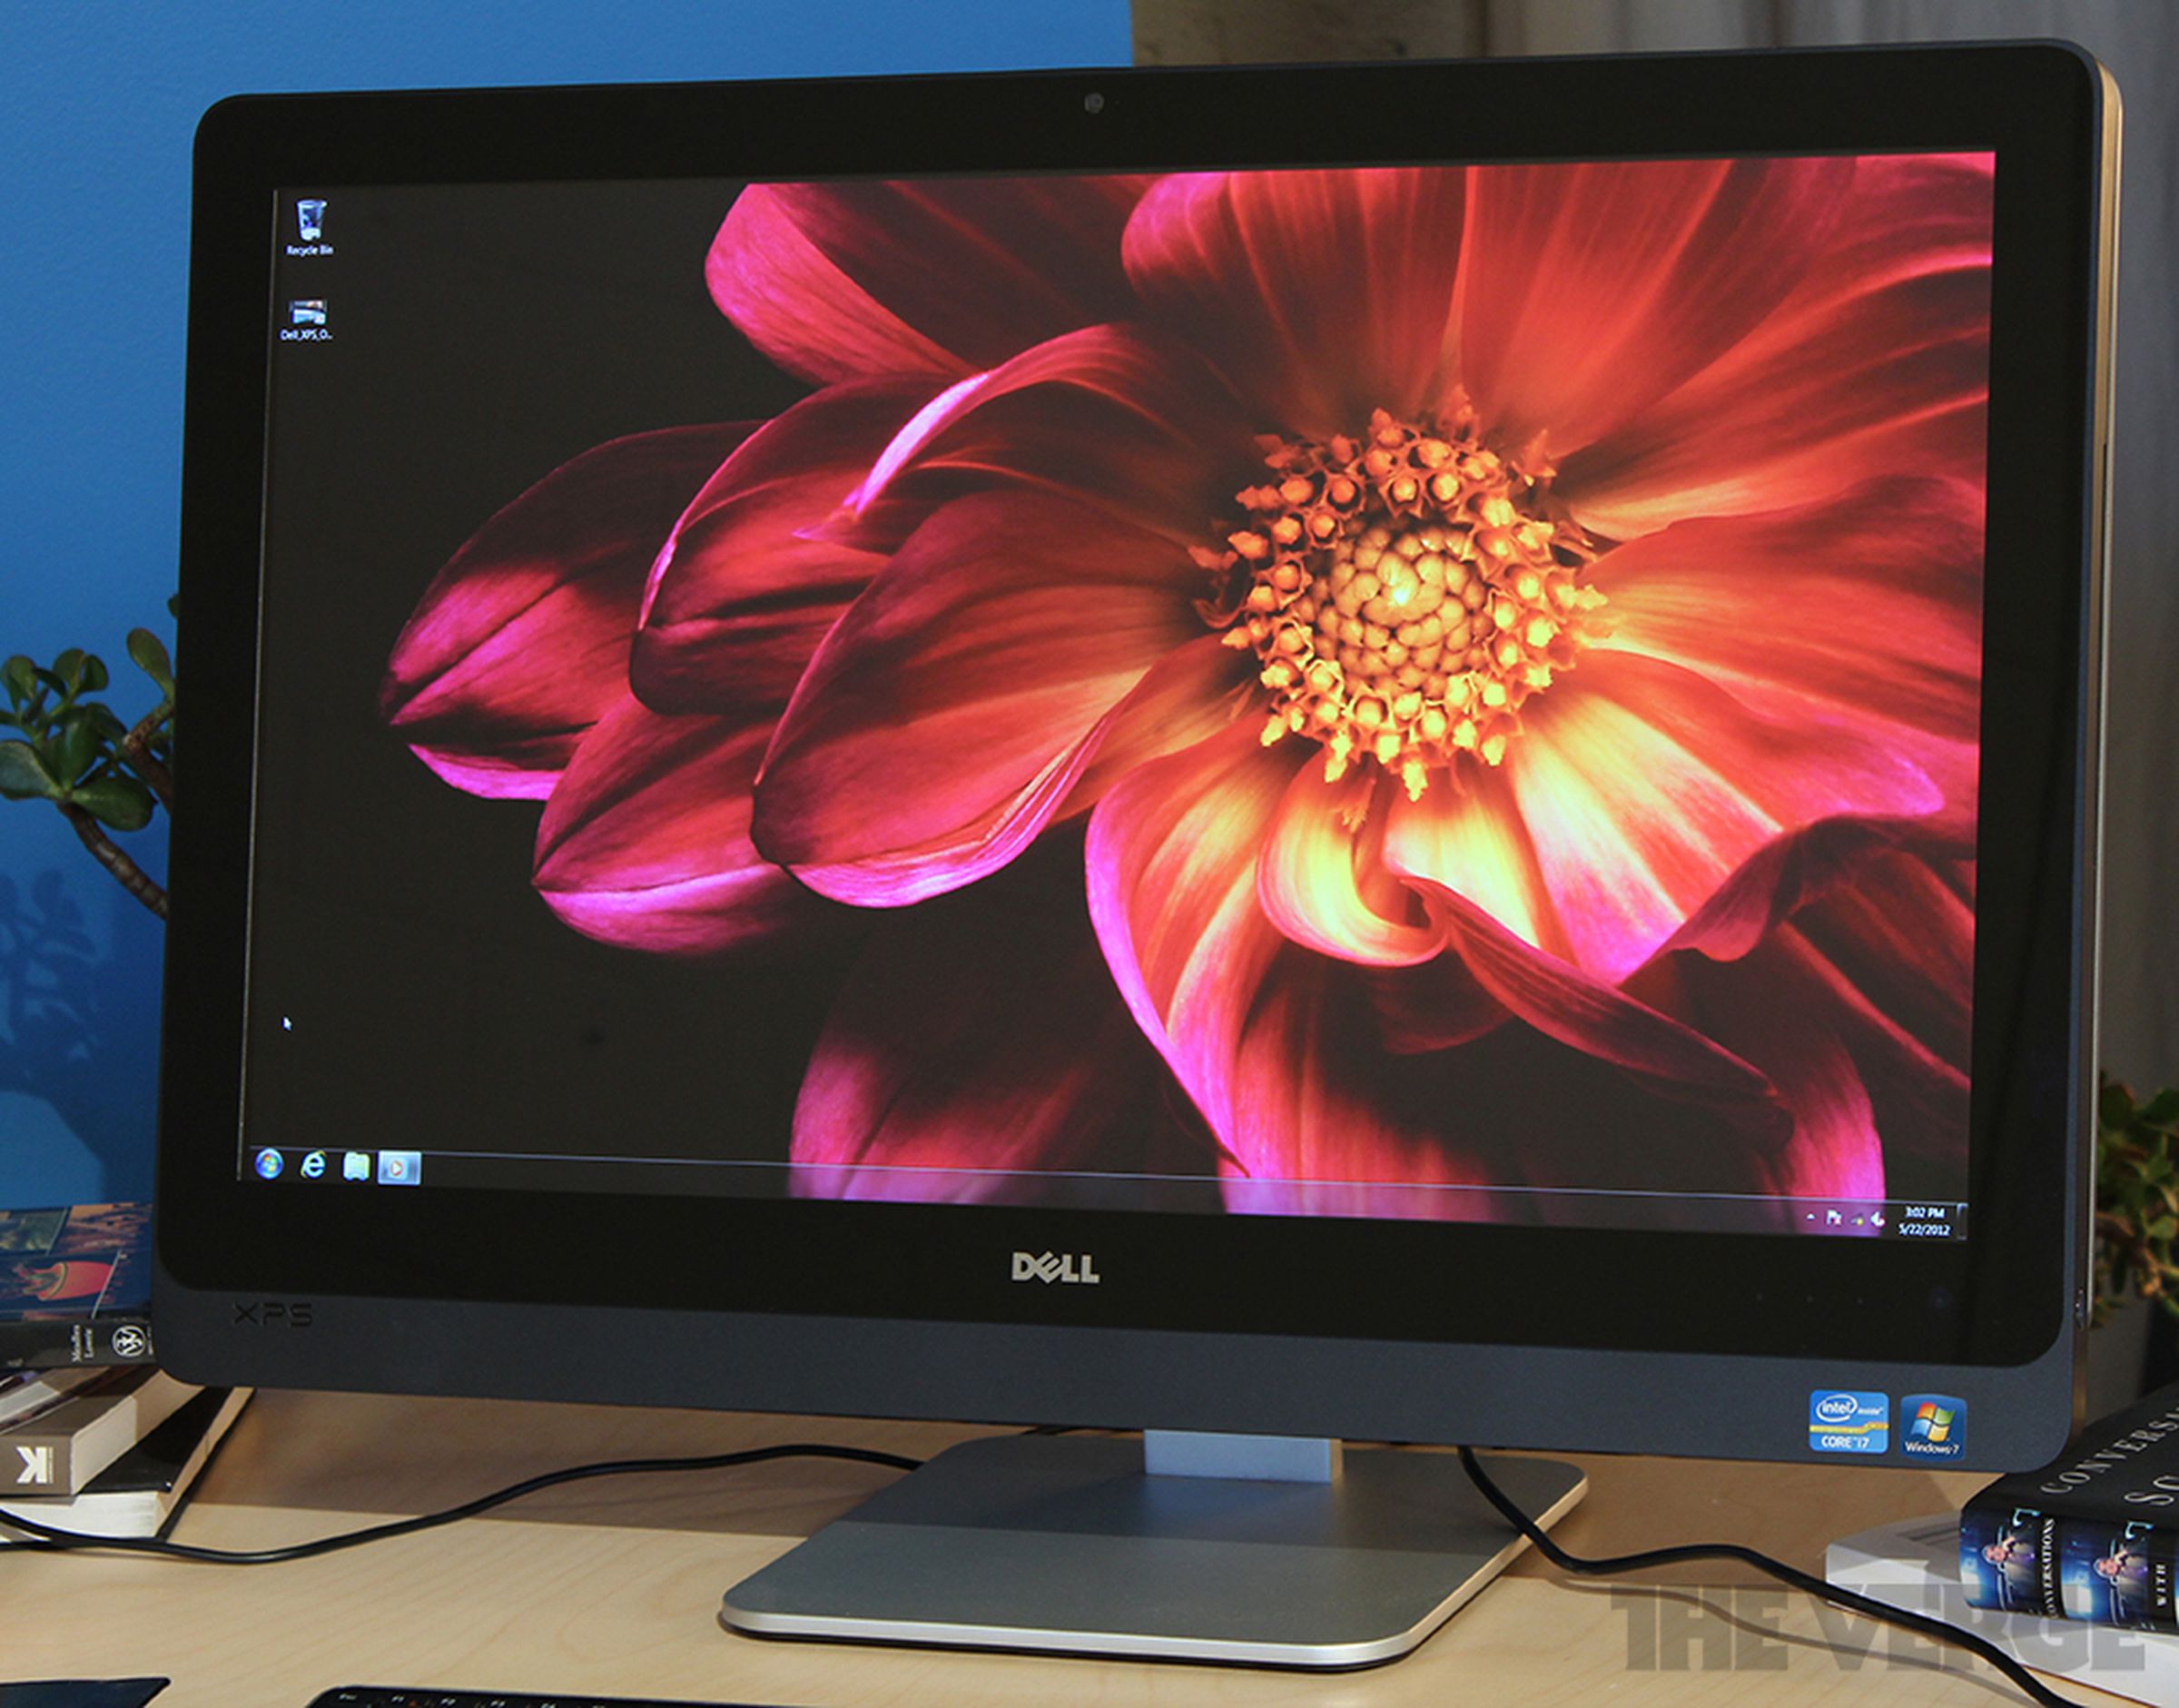 Dell XPS One 27 all-in-one hands-on photos